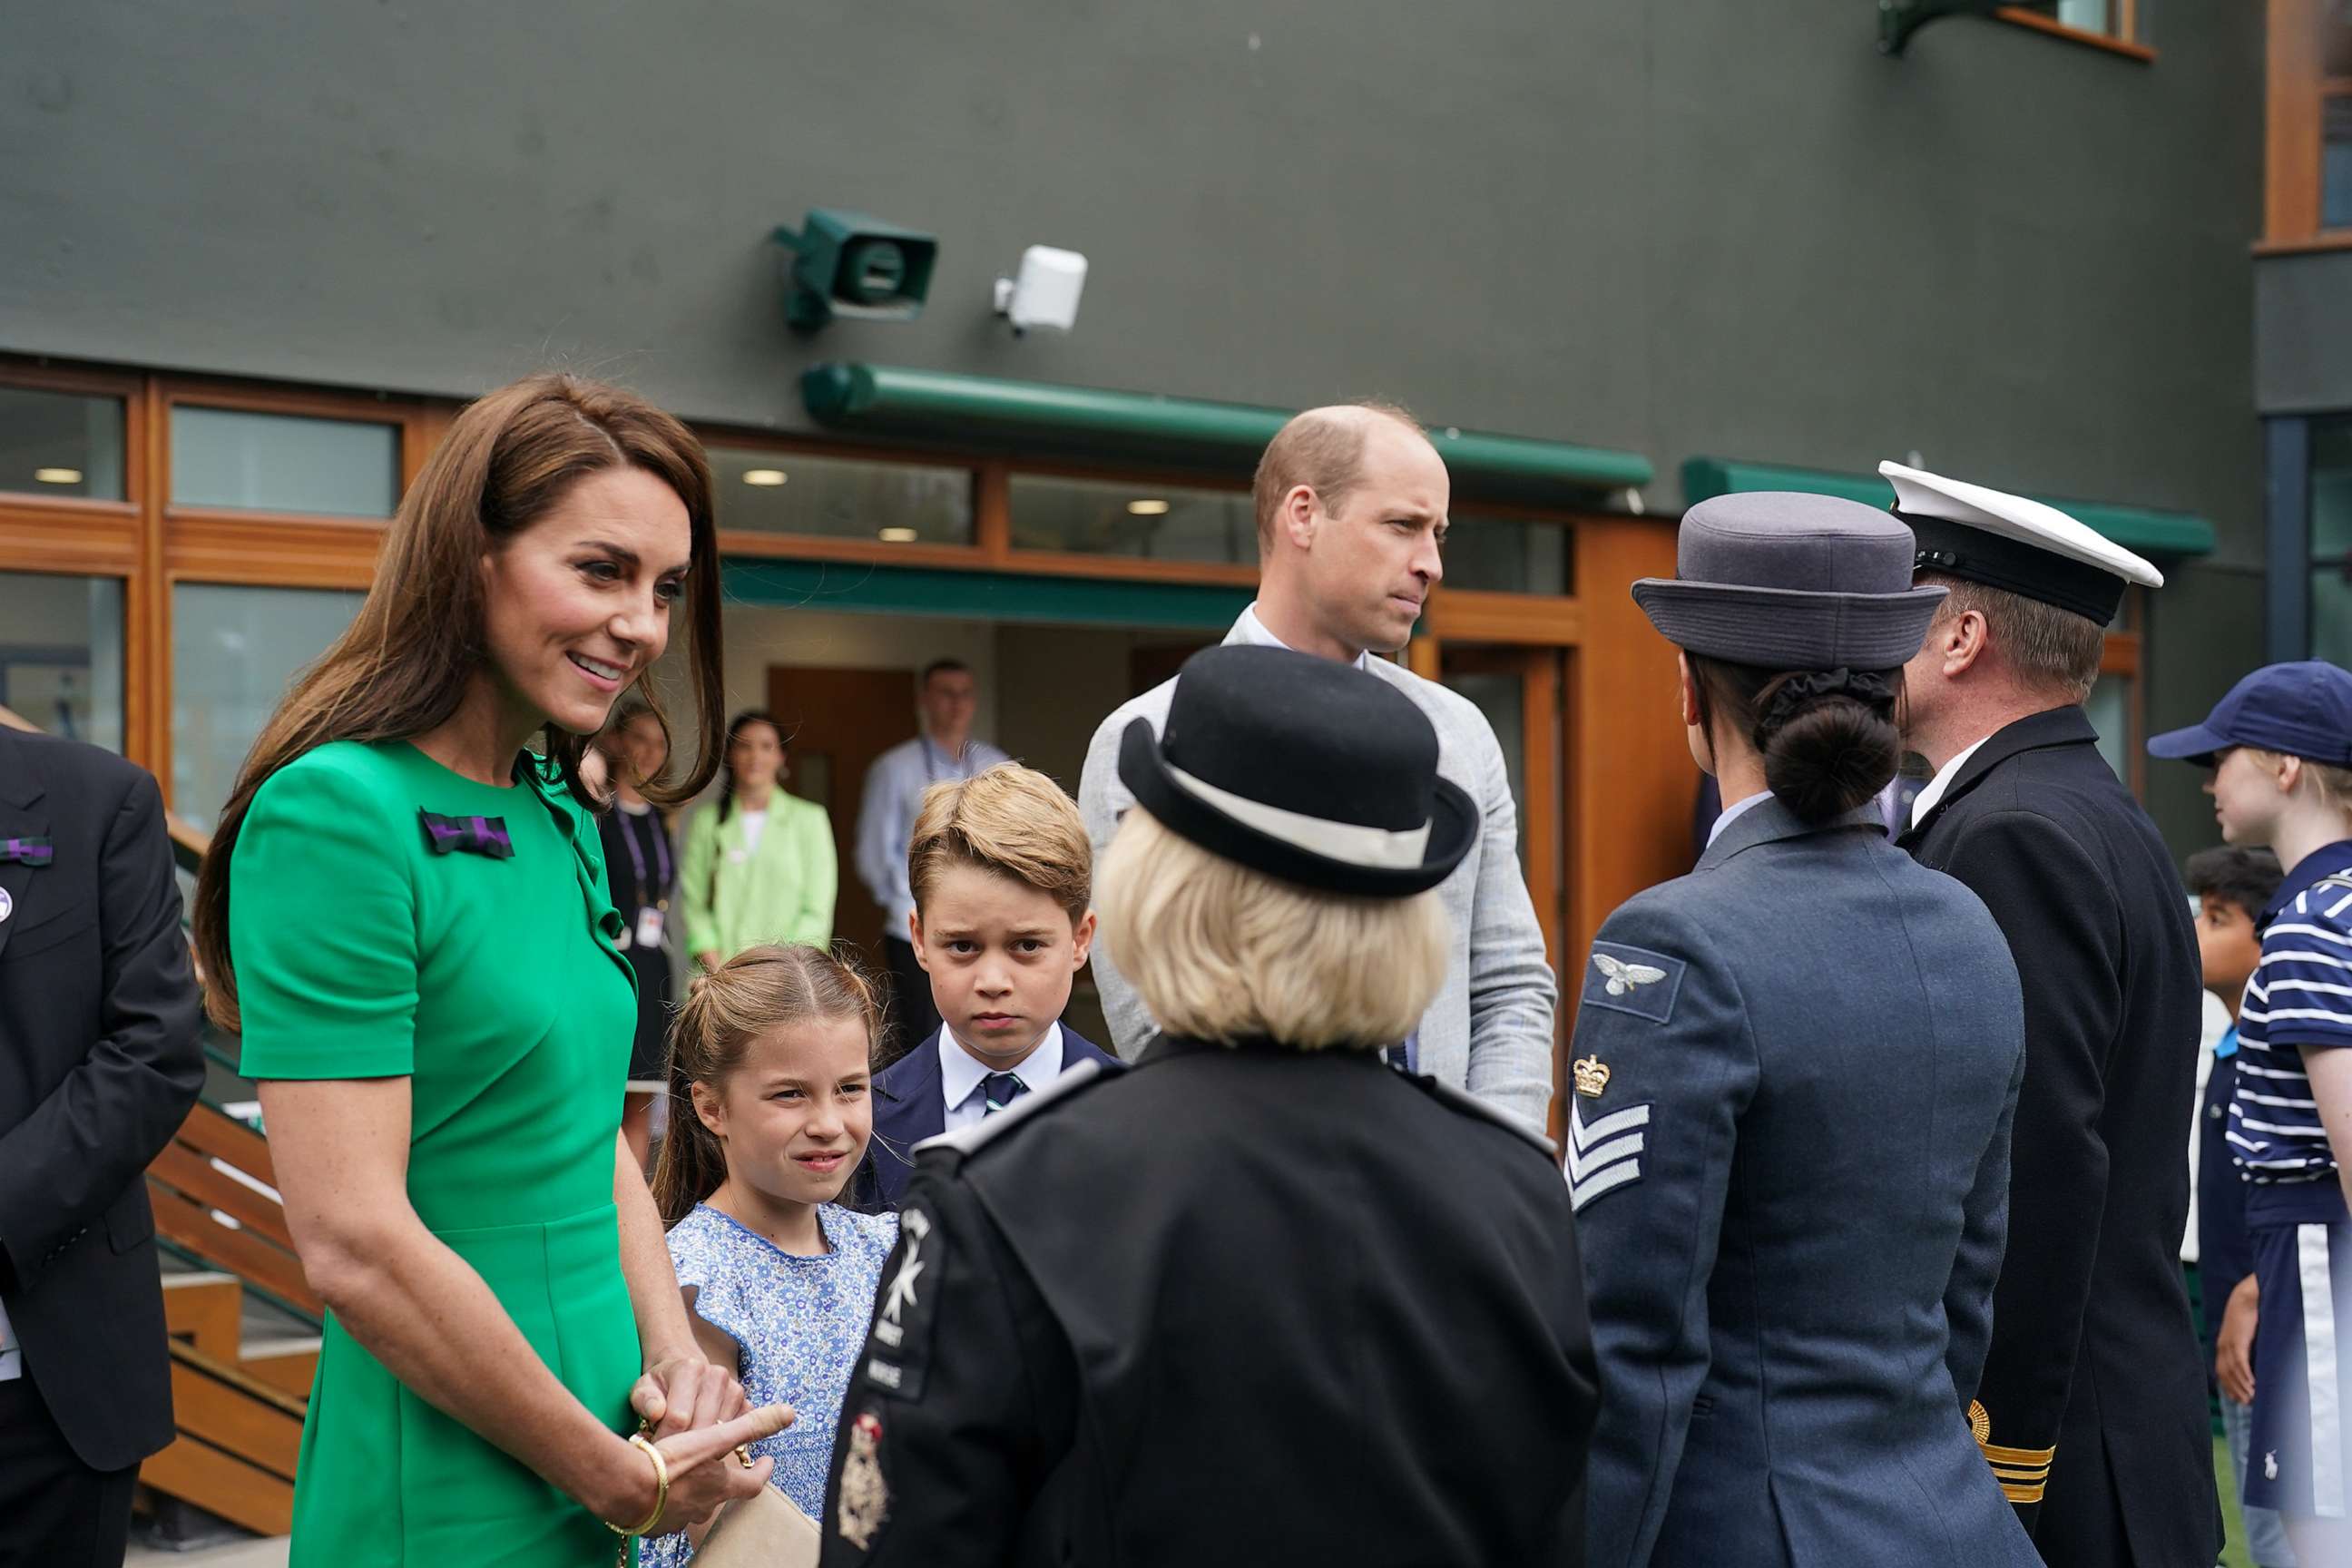 Princess Charlotte and Prince George have a ball at Wimbledon men's final